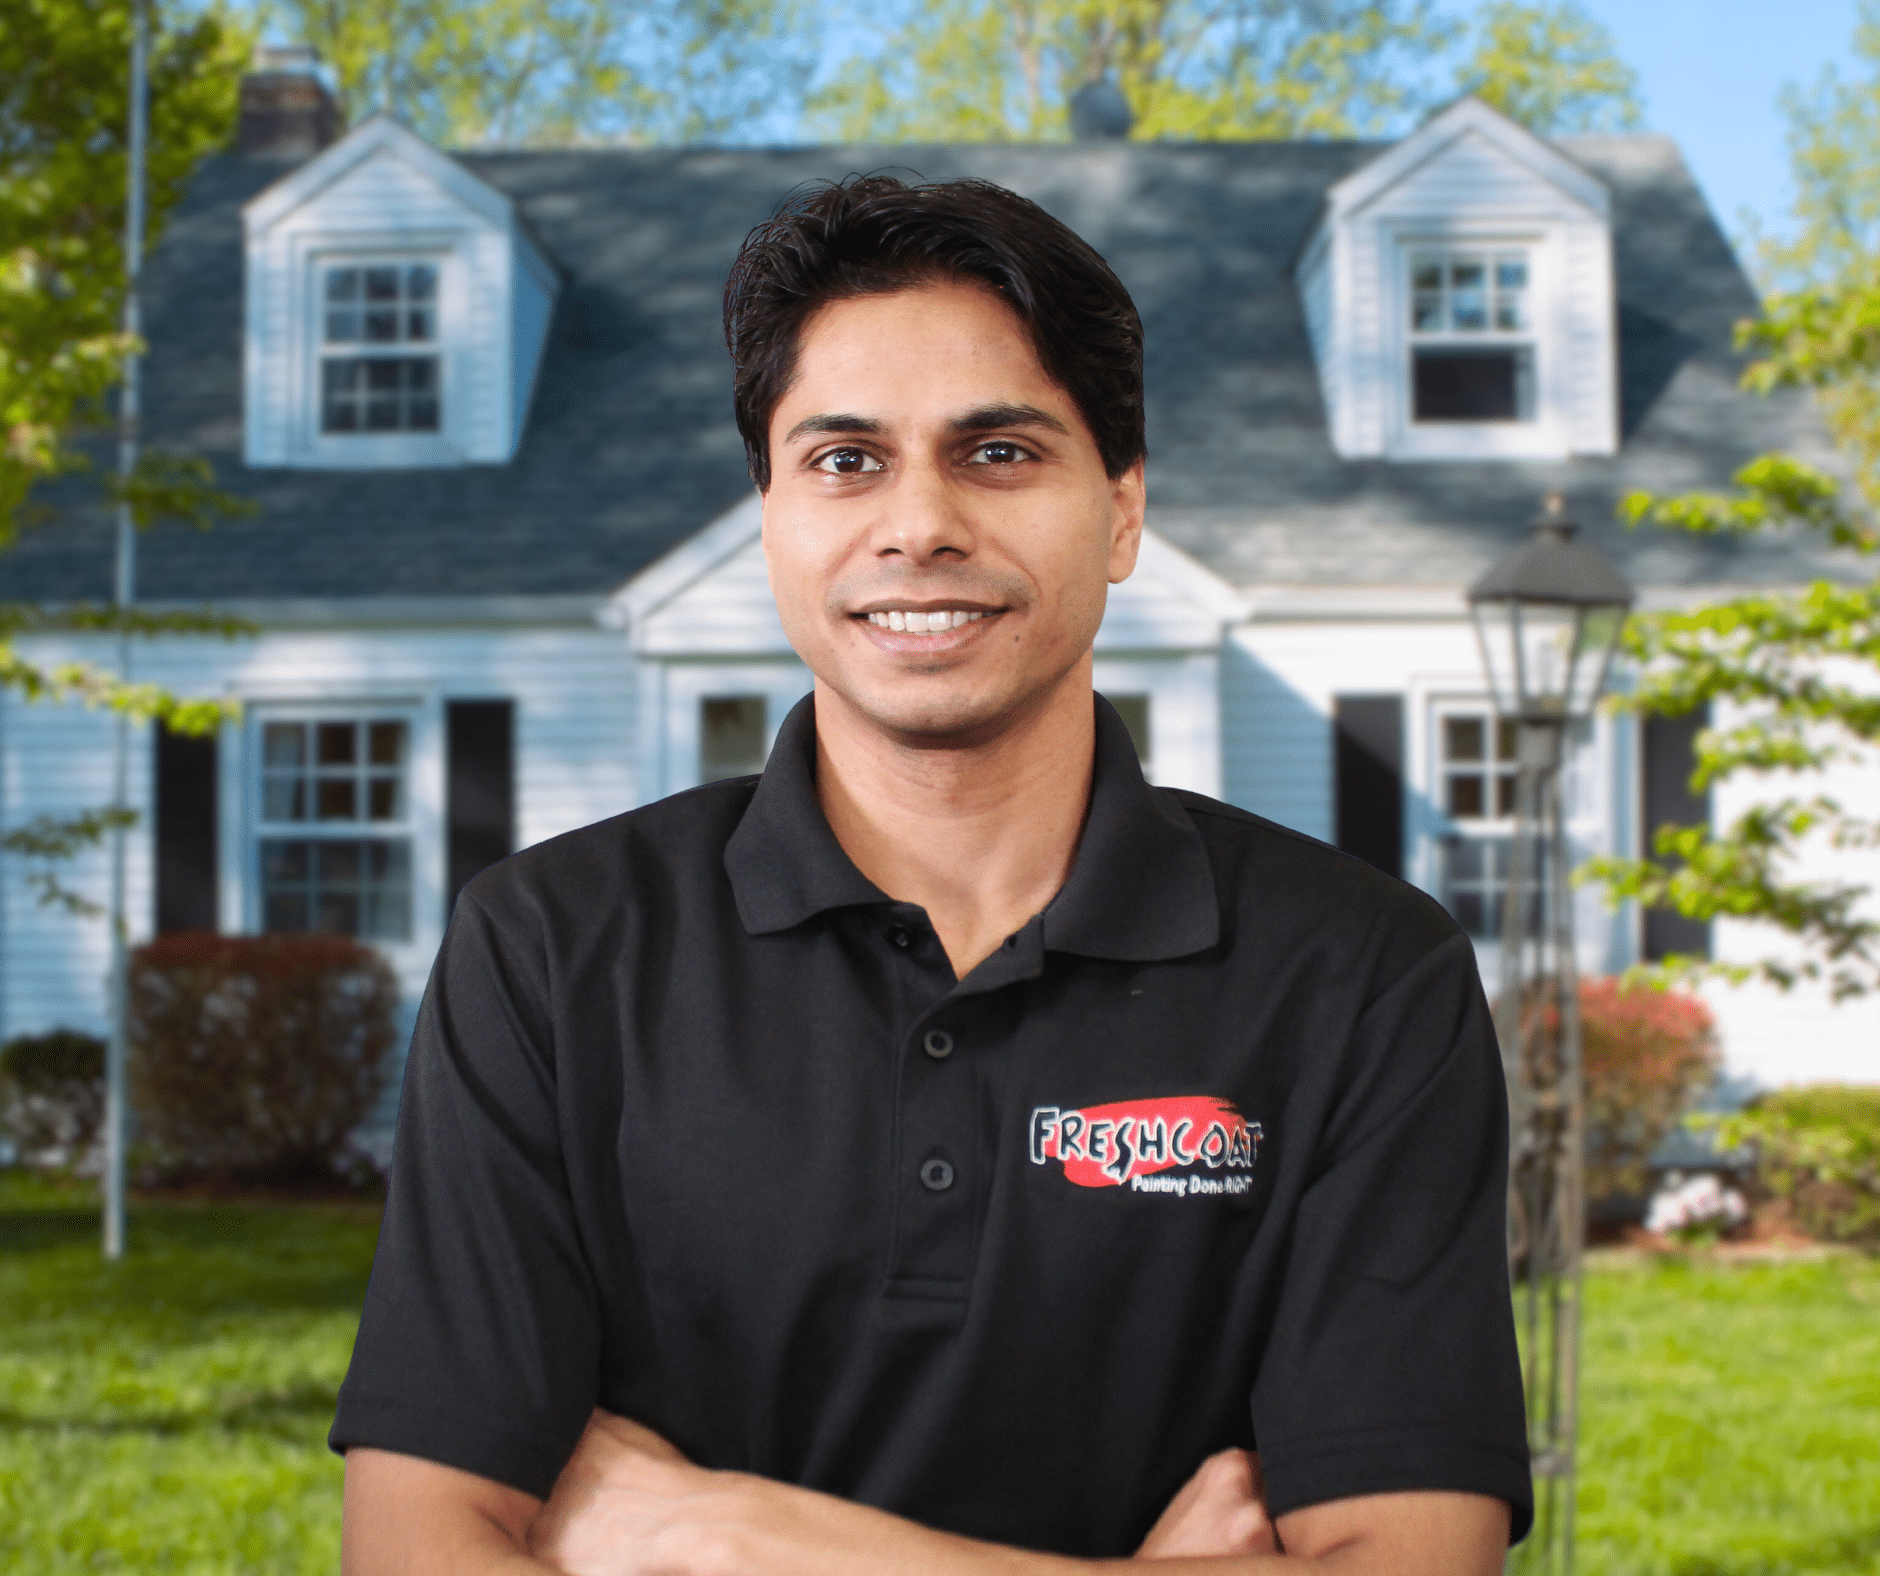 business owner standing in front of a house